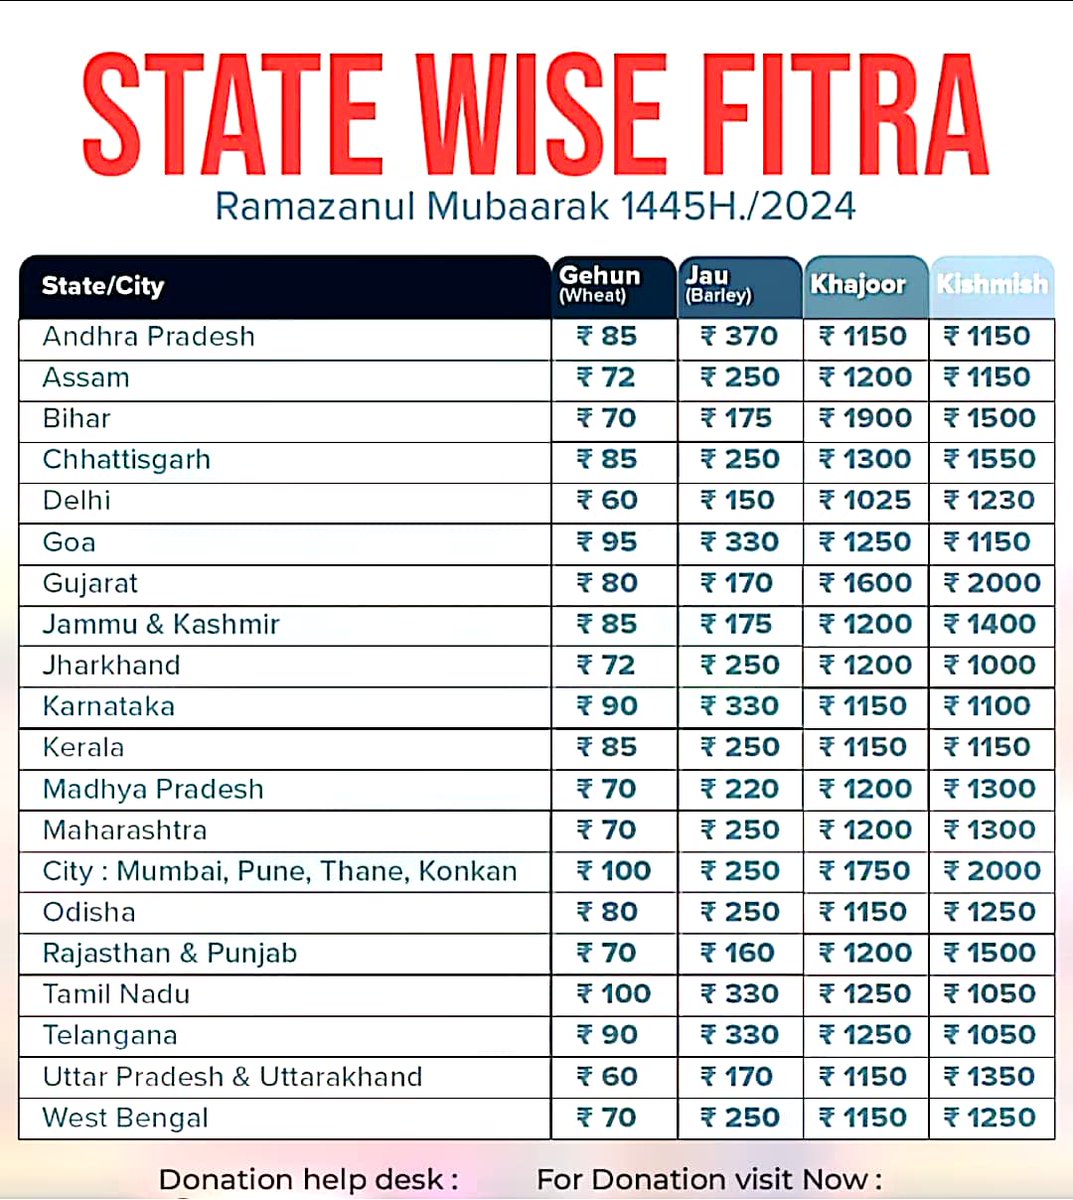 Statewise #Fitra. Make sure to pay before Eid Namaz, as per your status and number of family members. You can pay to us and we will distribute on behalf of you in sha Allah. Our UPI ID: maholofficial@okhdfcbank